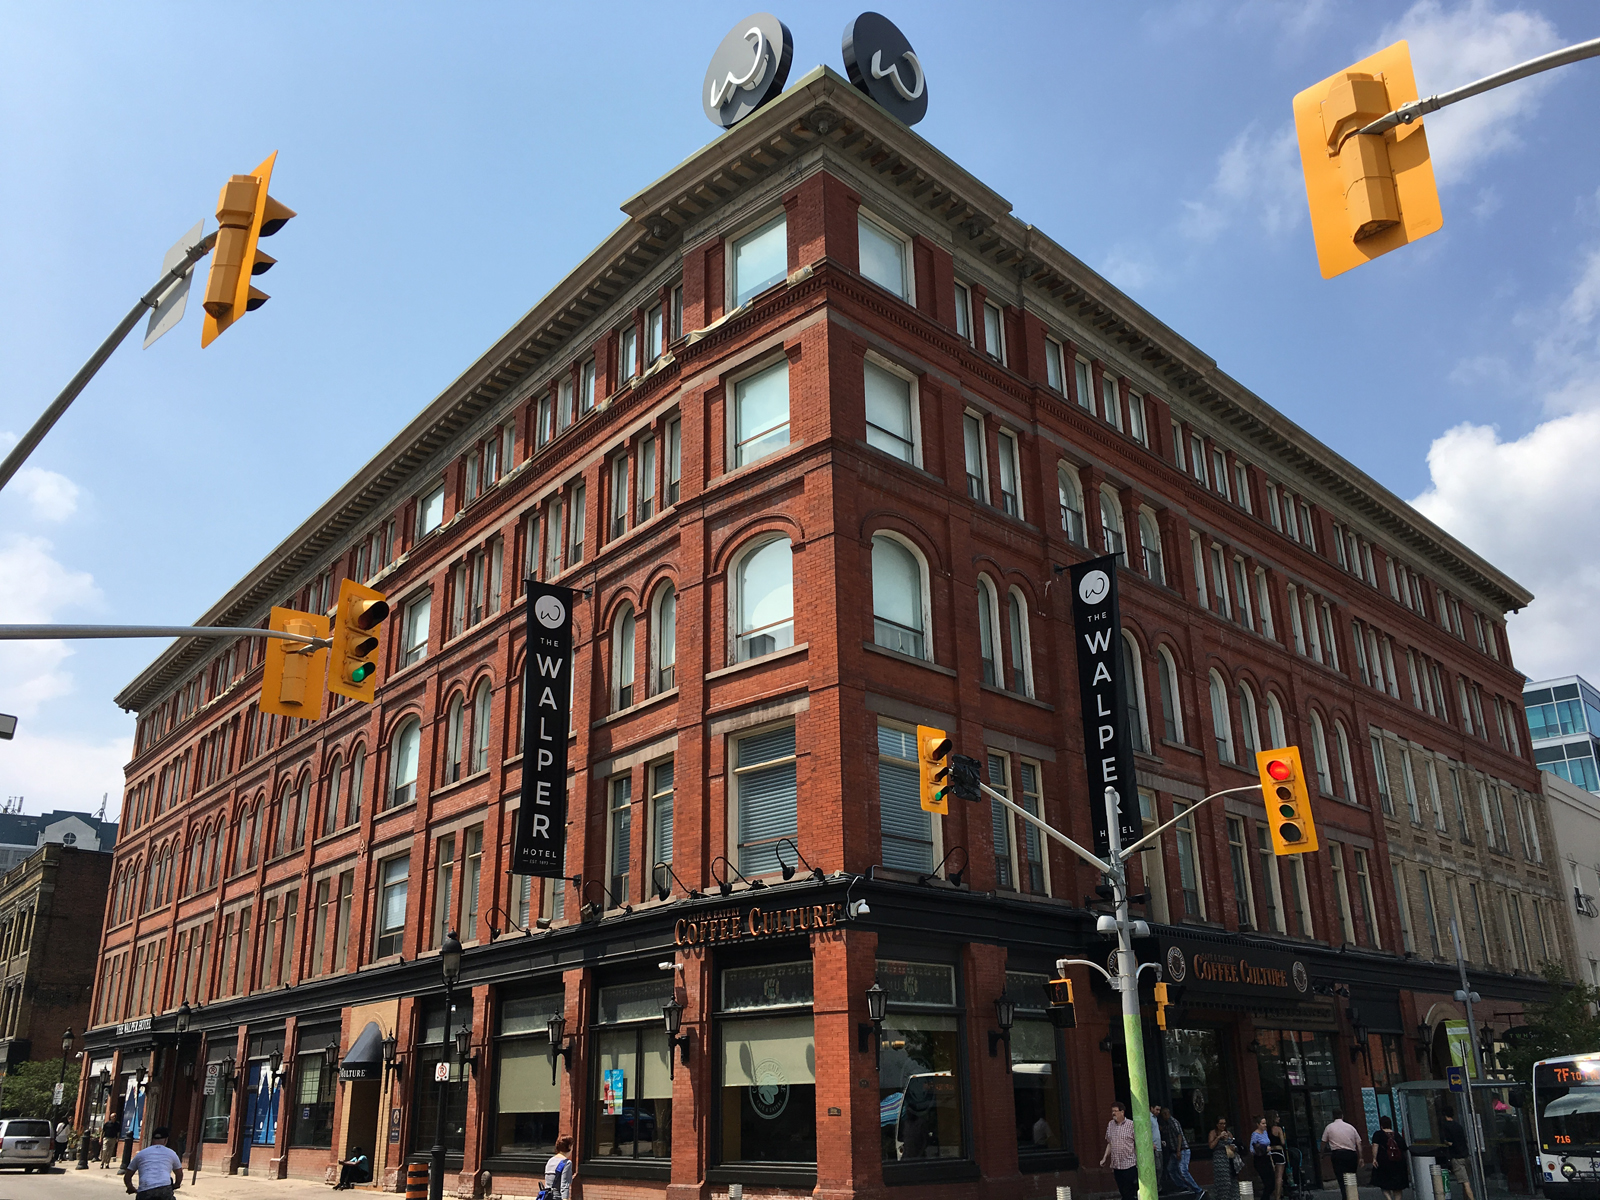 Corner view photo of the Walper Hotel, a heritage building in downtown Kitchener